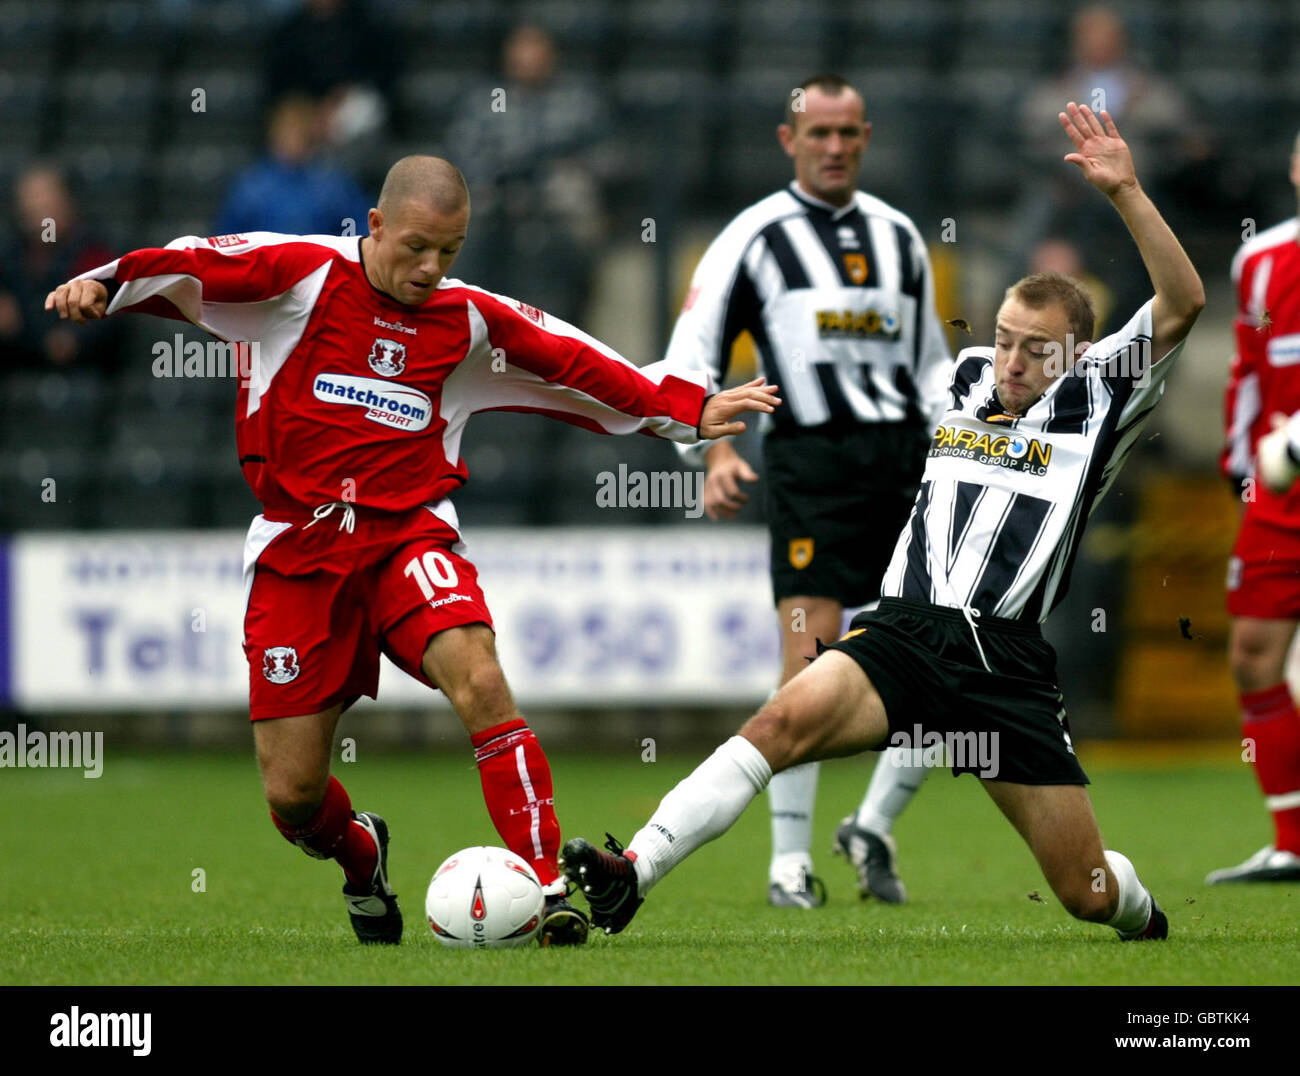 Soccer - Coca-Cola Football League Two - Notts County v Leyton Orient. Notts County's Matthew Gill and Leyton Orient's Lee Steele Stock Photo